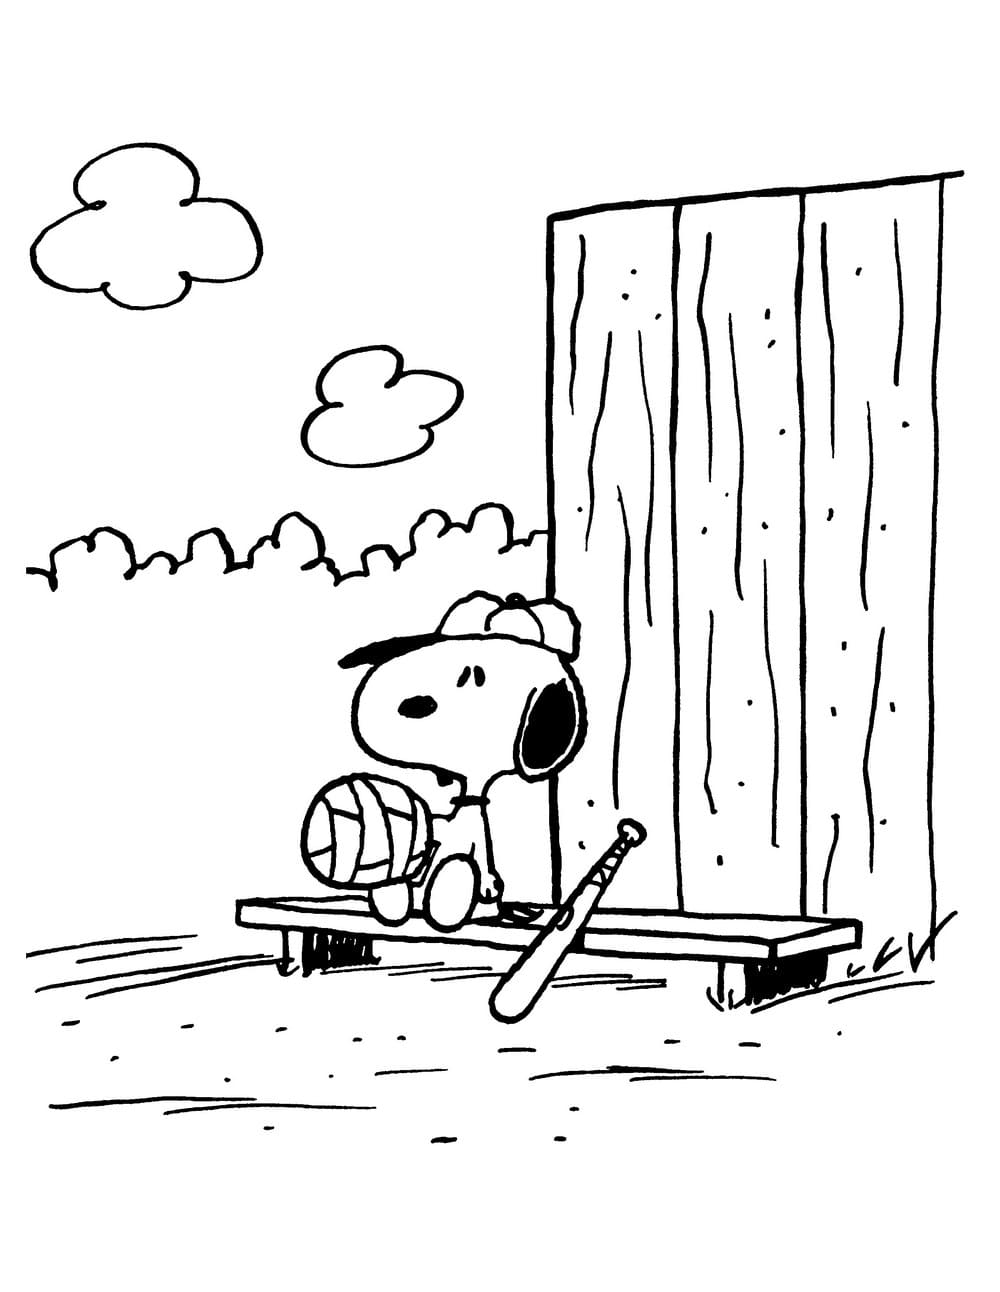 Snoopy coloring pages. Print in A4 format | WONDER DAY — Coloring pages ...